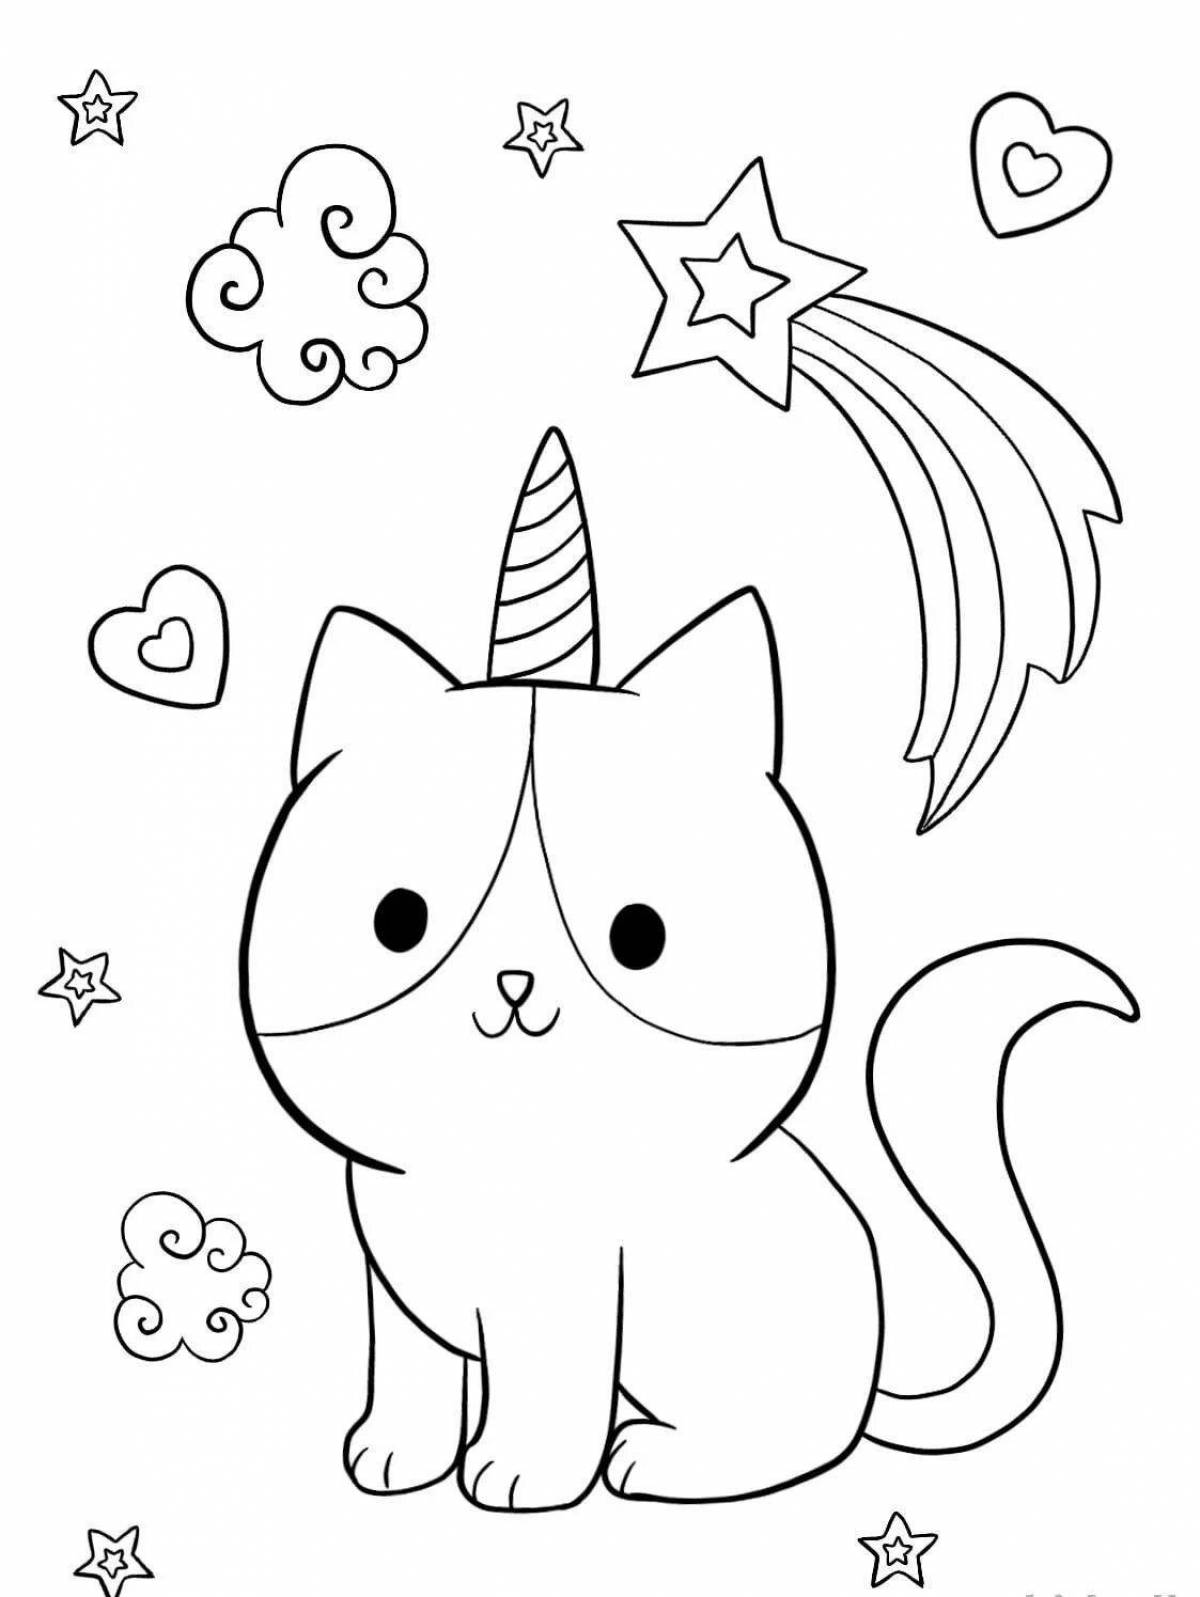 Sweet unicorn cat coloring book for kids